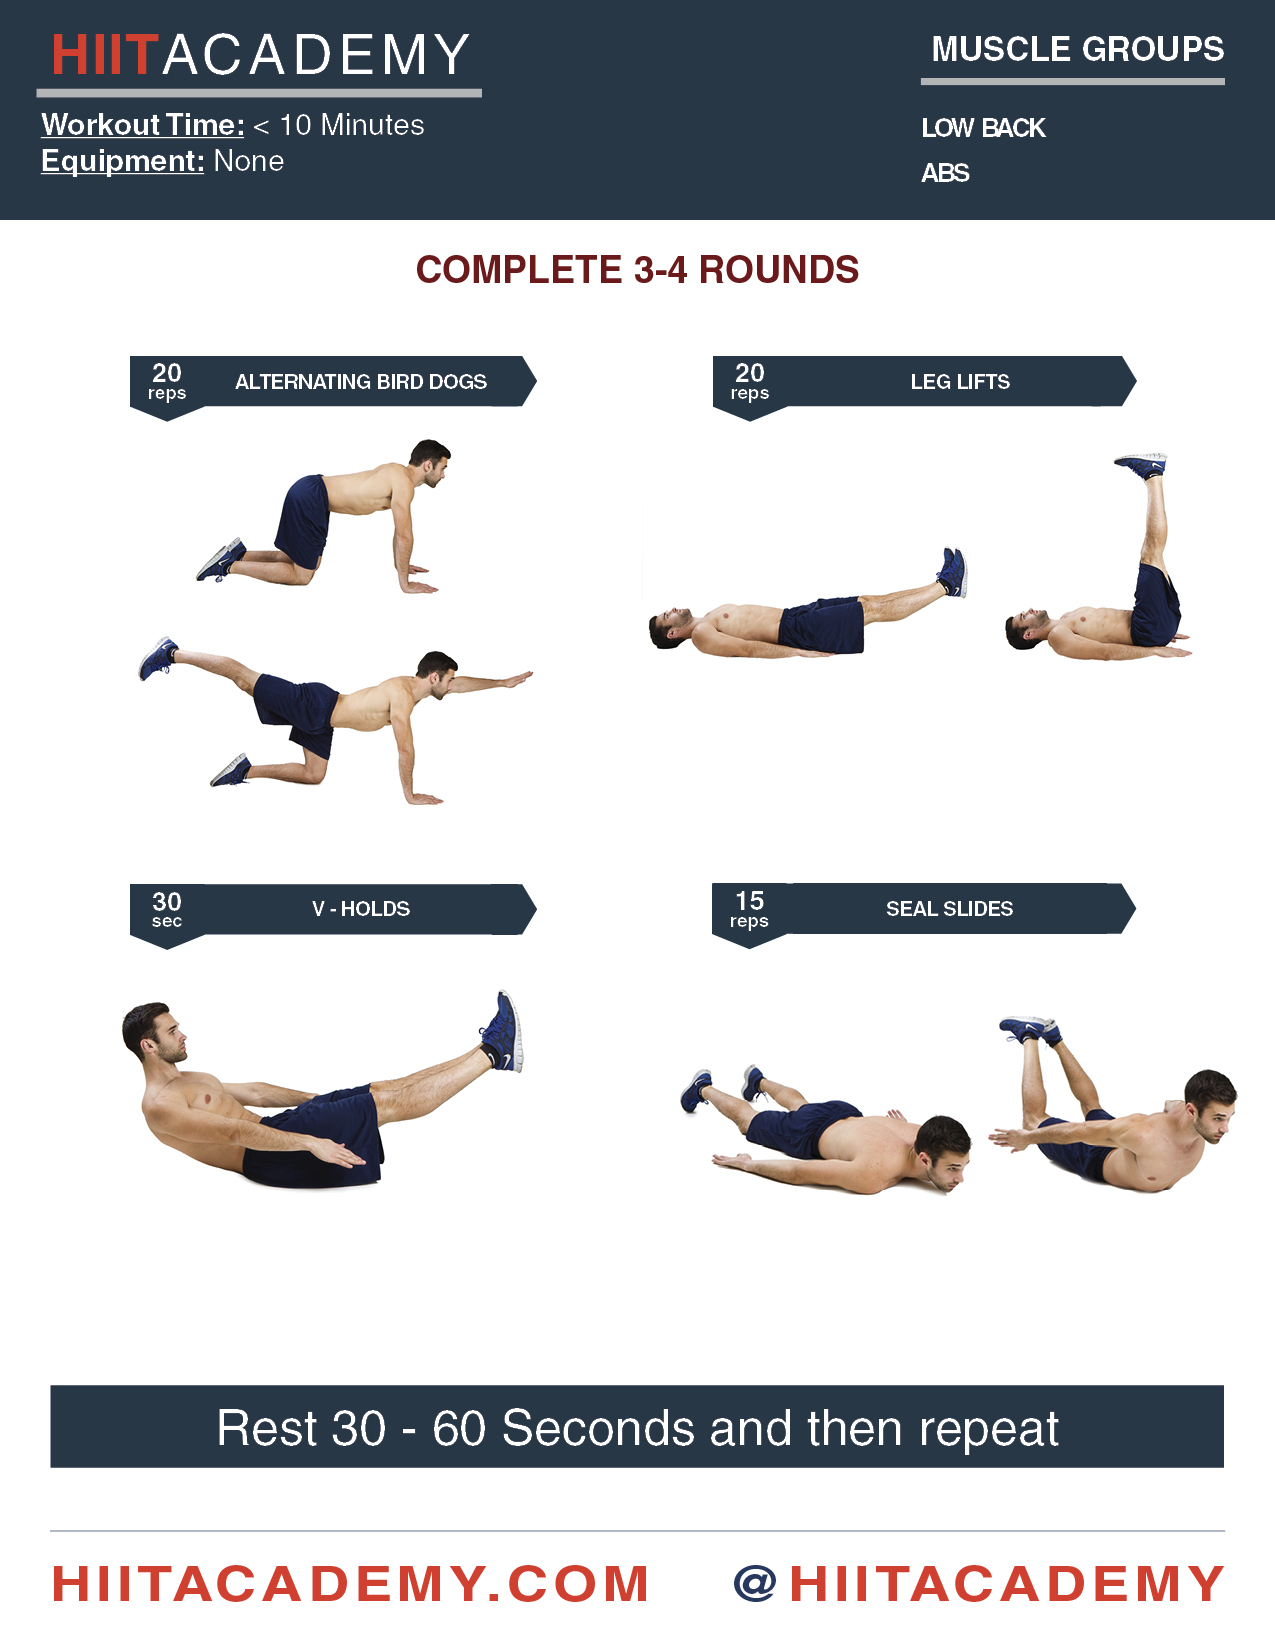 5 Day Hiit Training Sporting Examples for Push Pull Legs